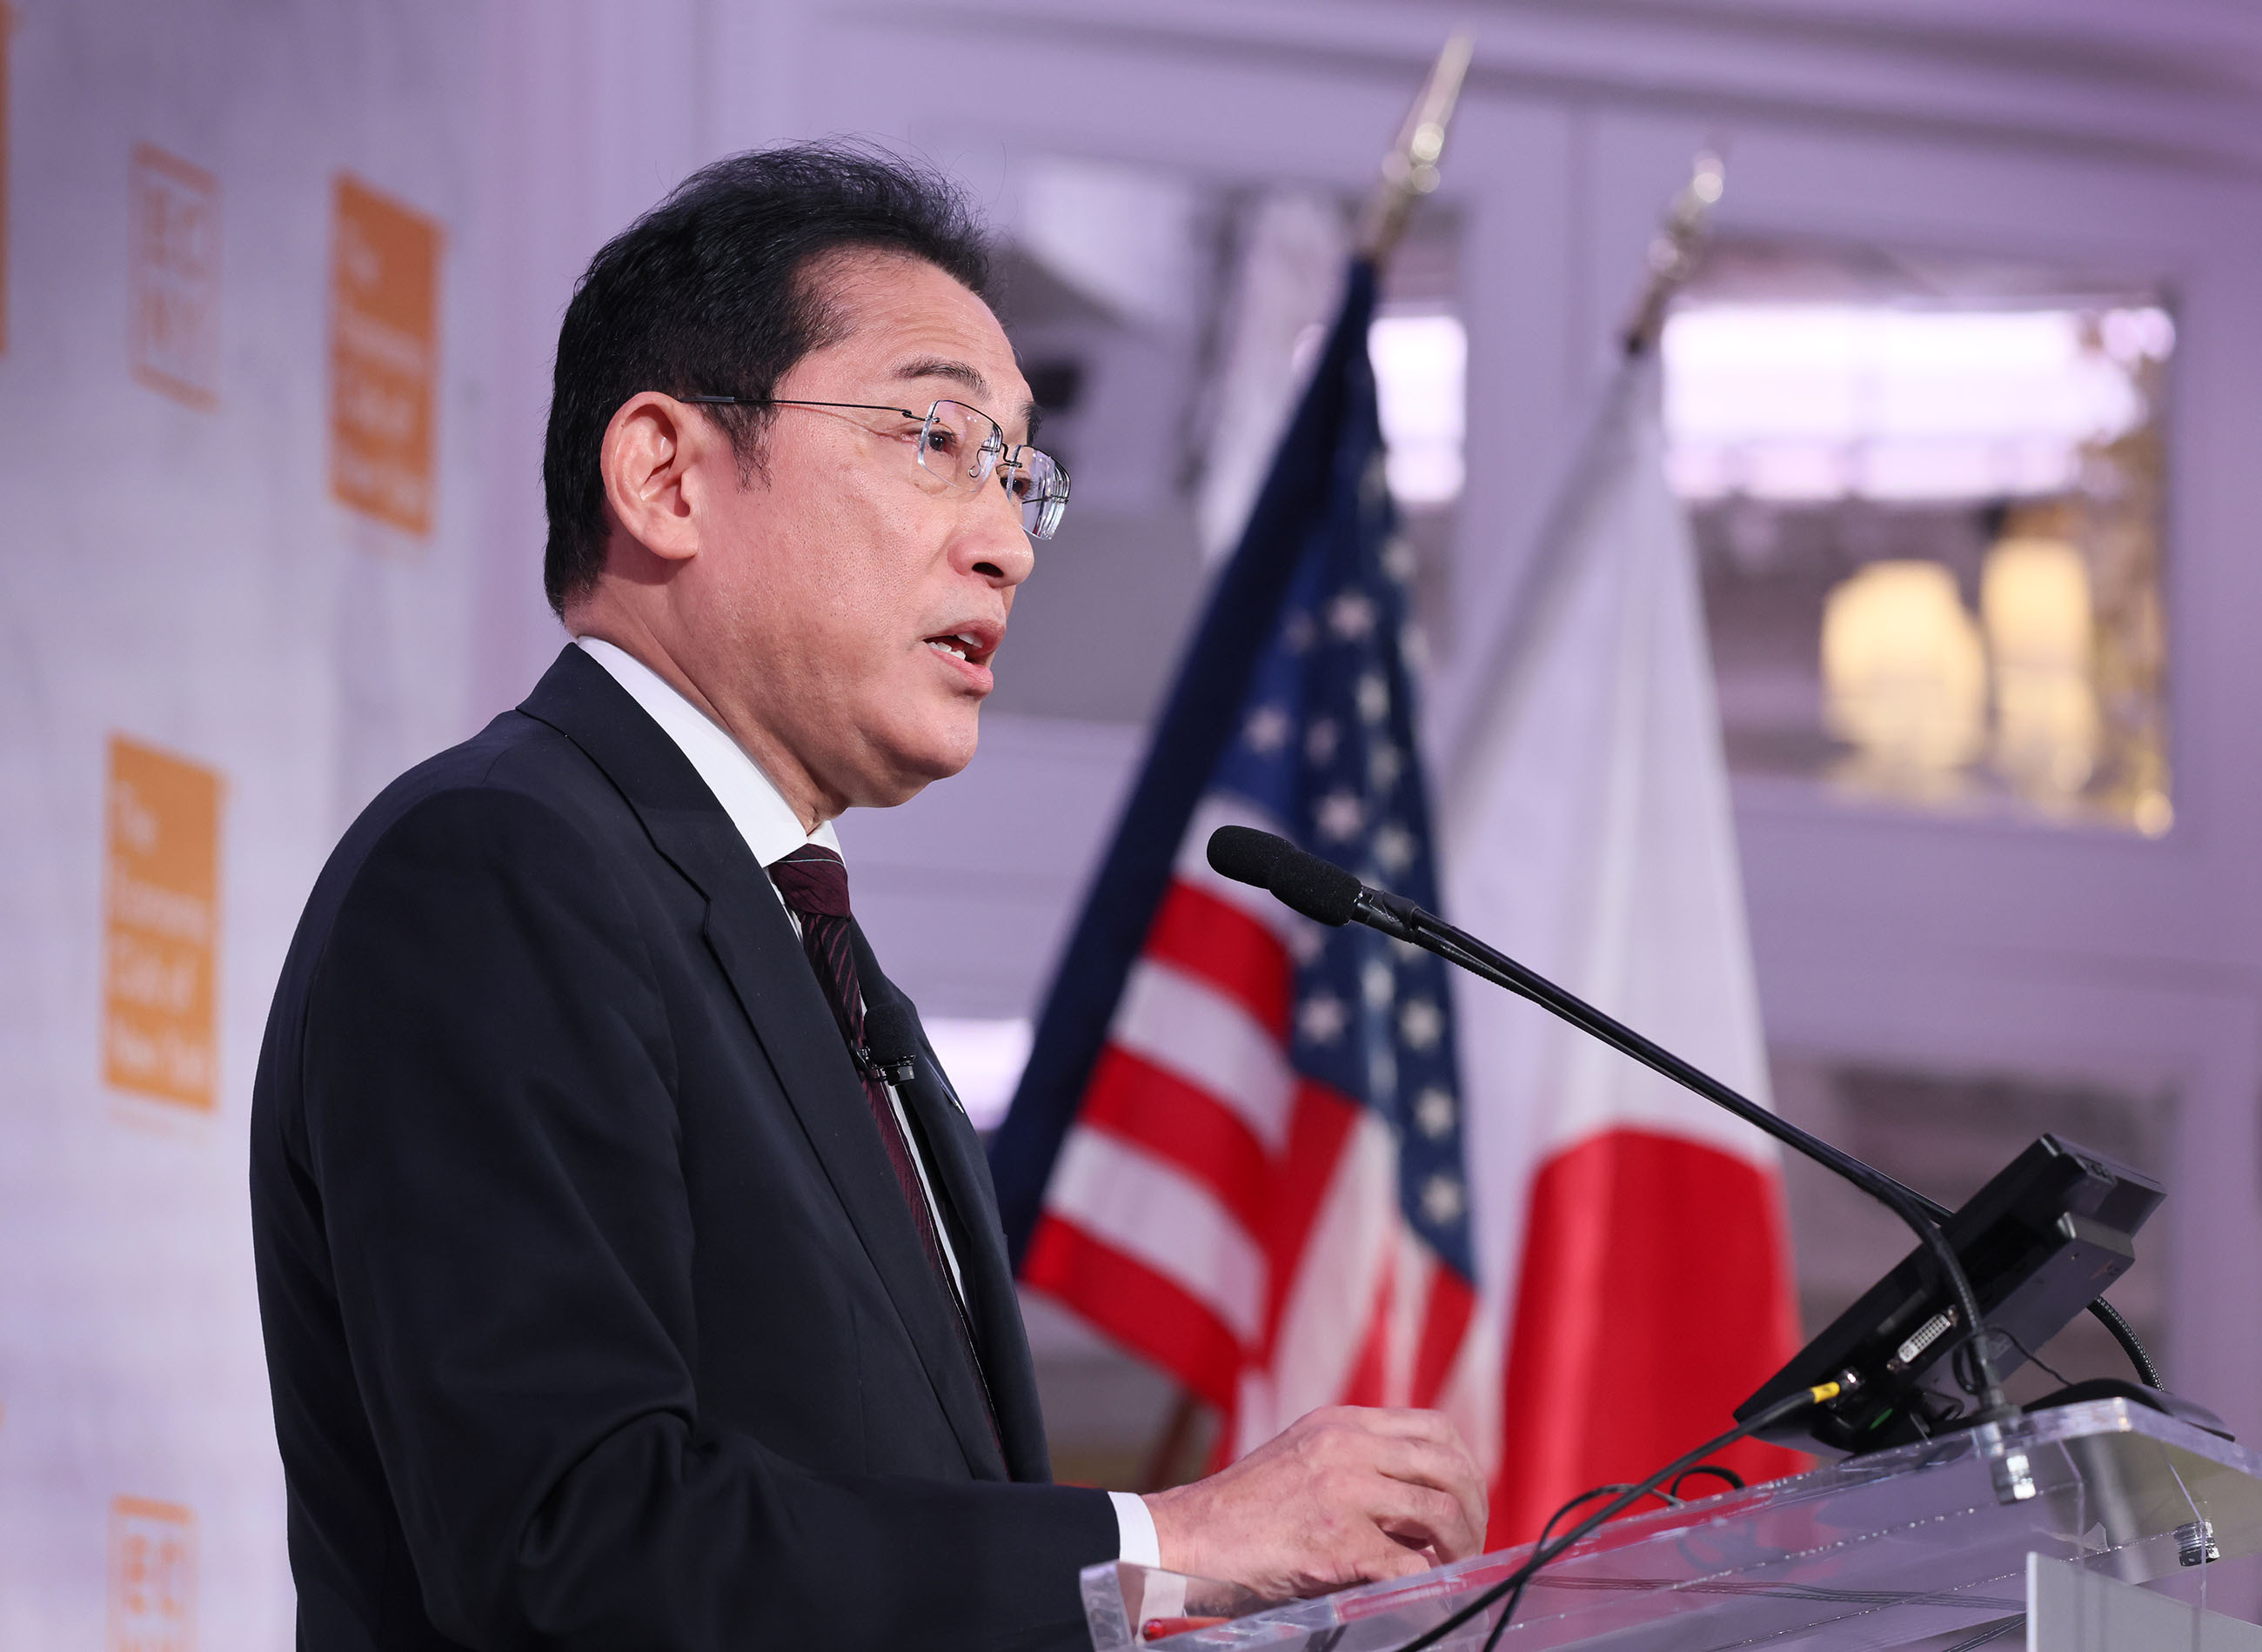 Prime Minister Kishida delivering his remarks to the Economic Club of New York (7)